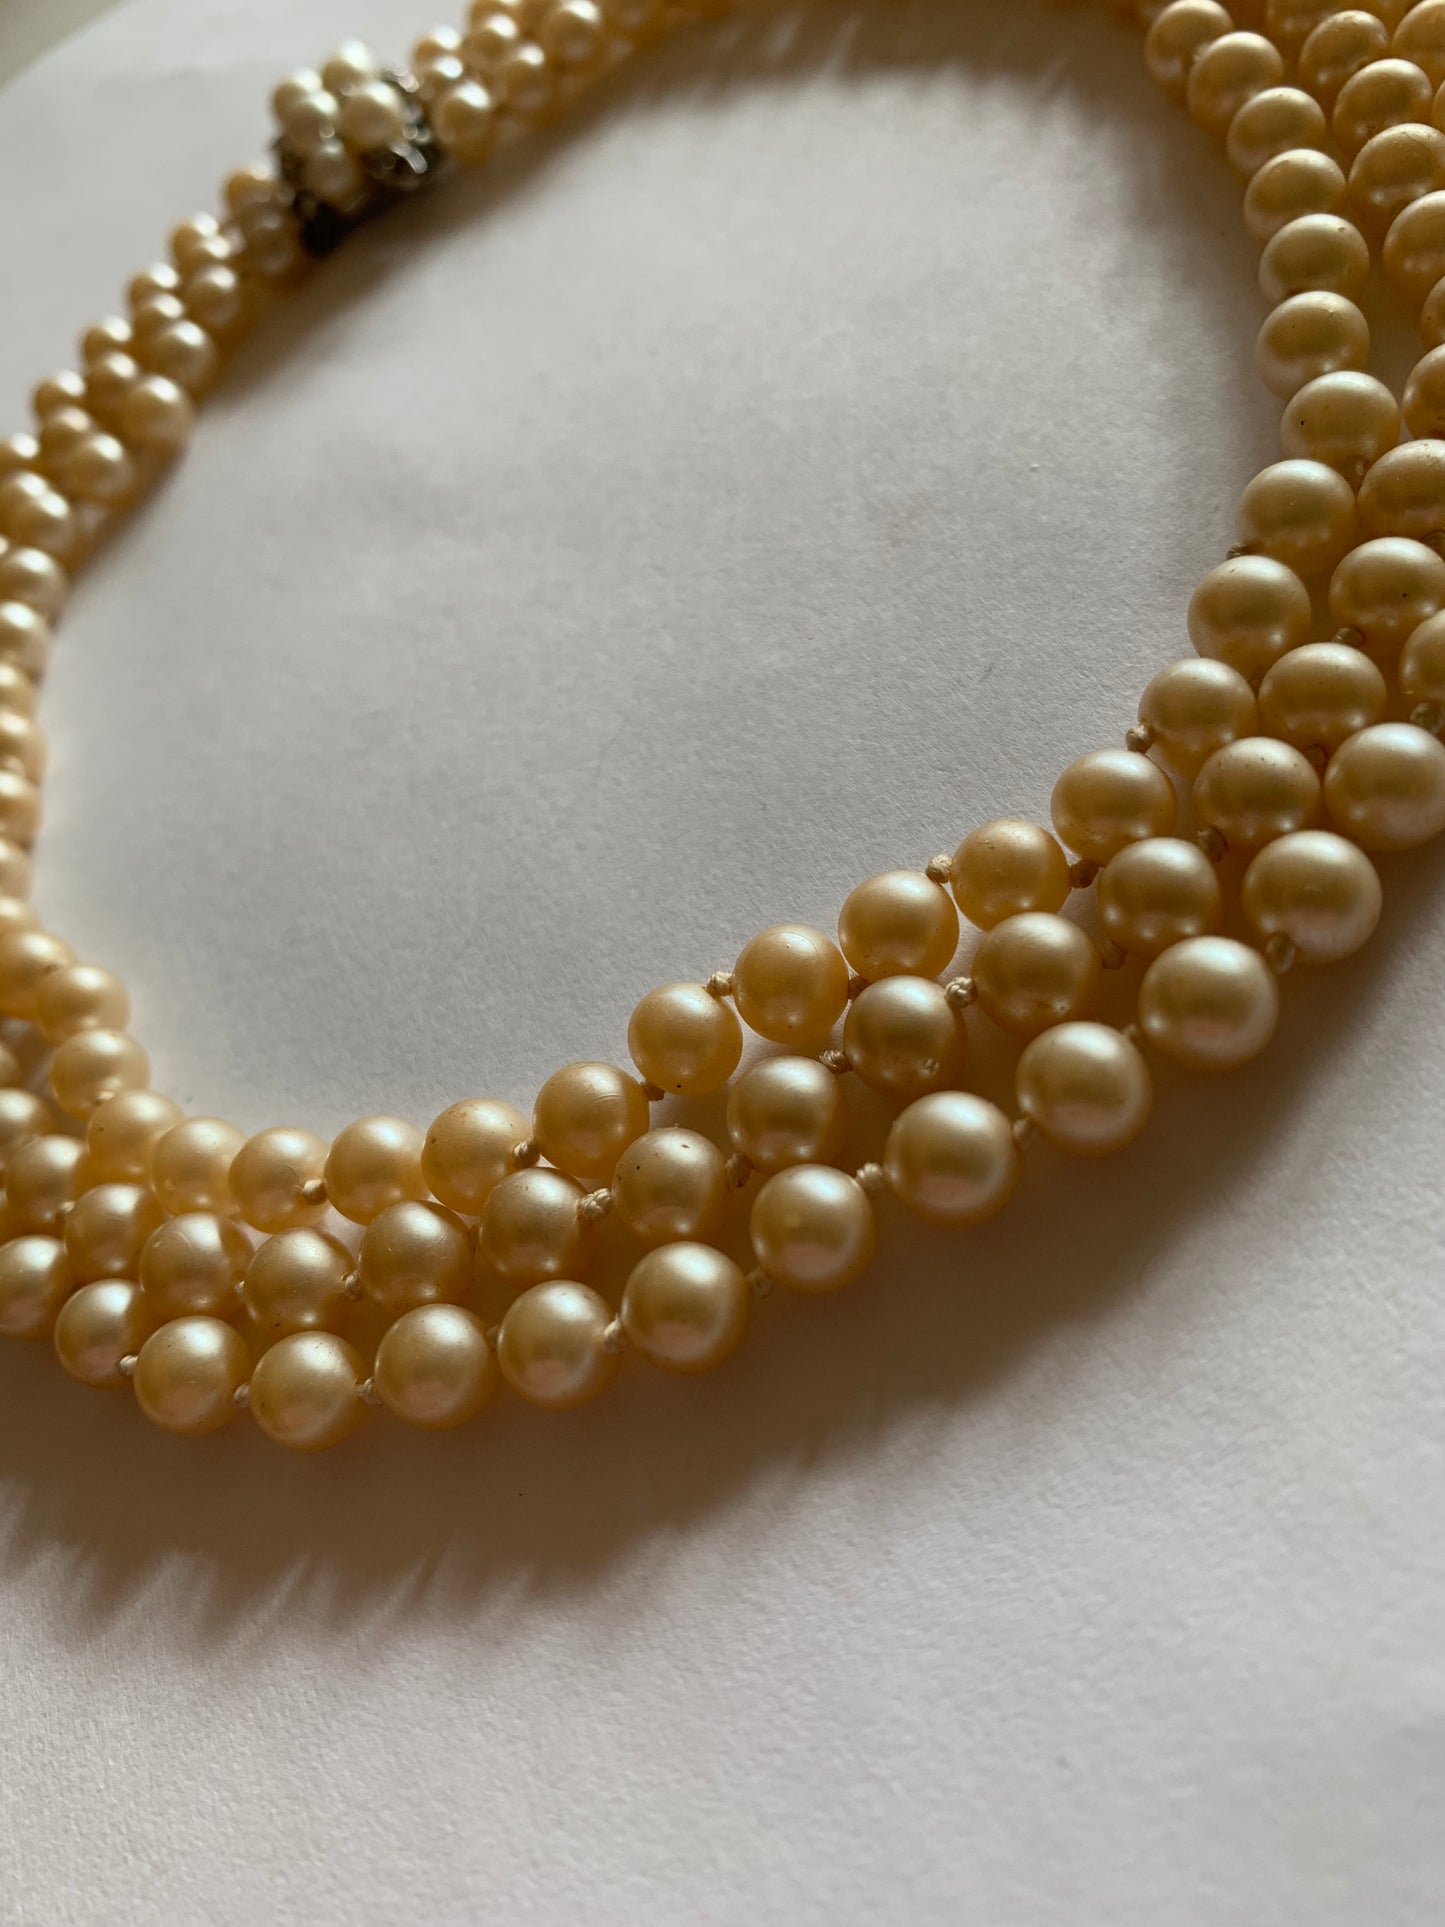 Triple Strand Faux Pearl Necklace with Rhinestones circa 1930s